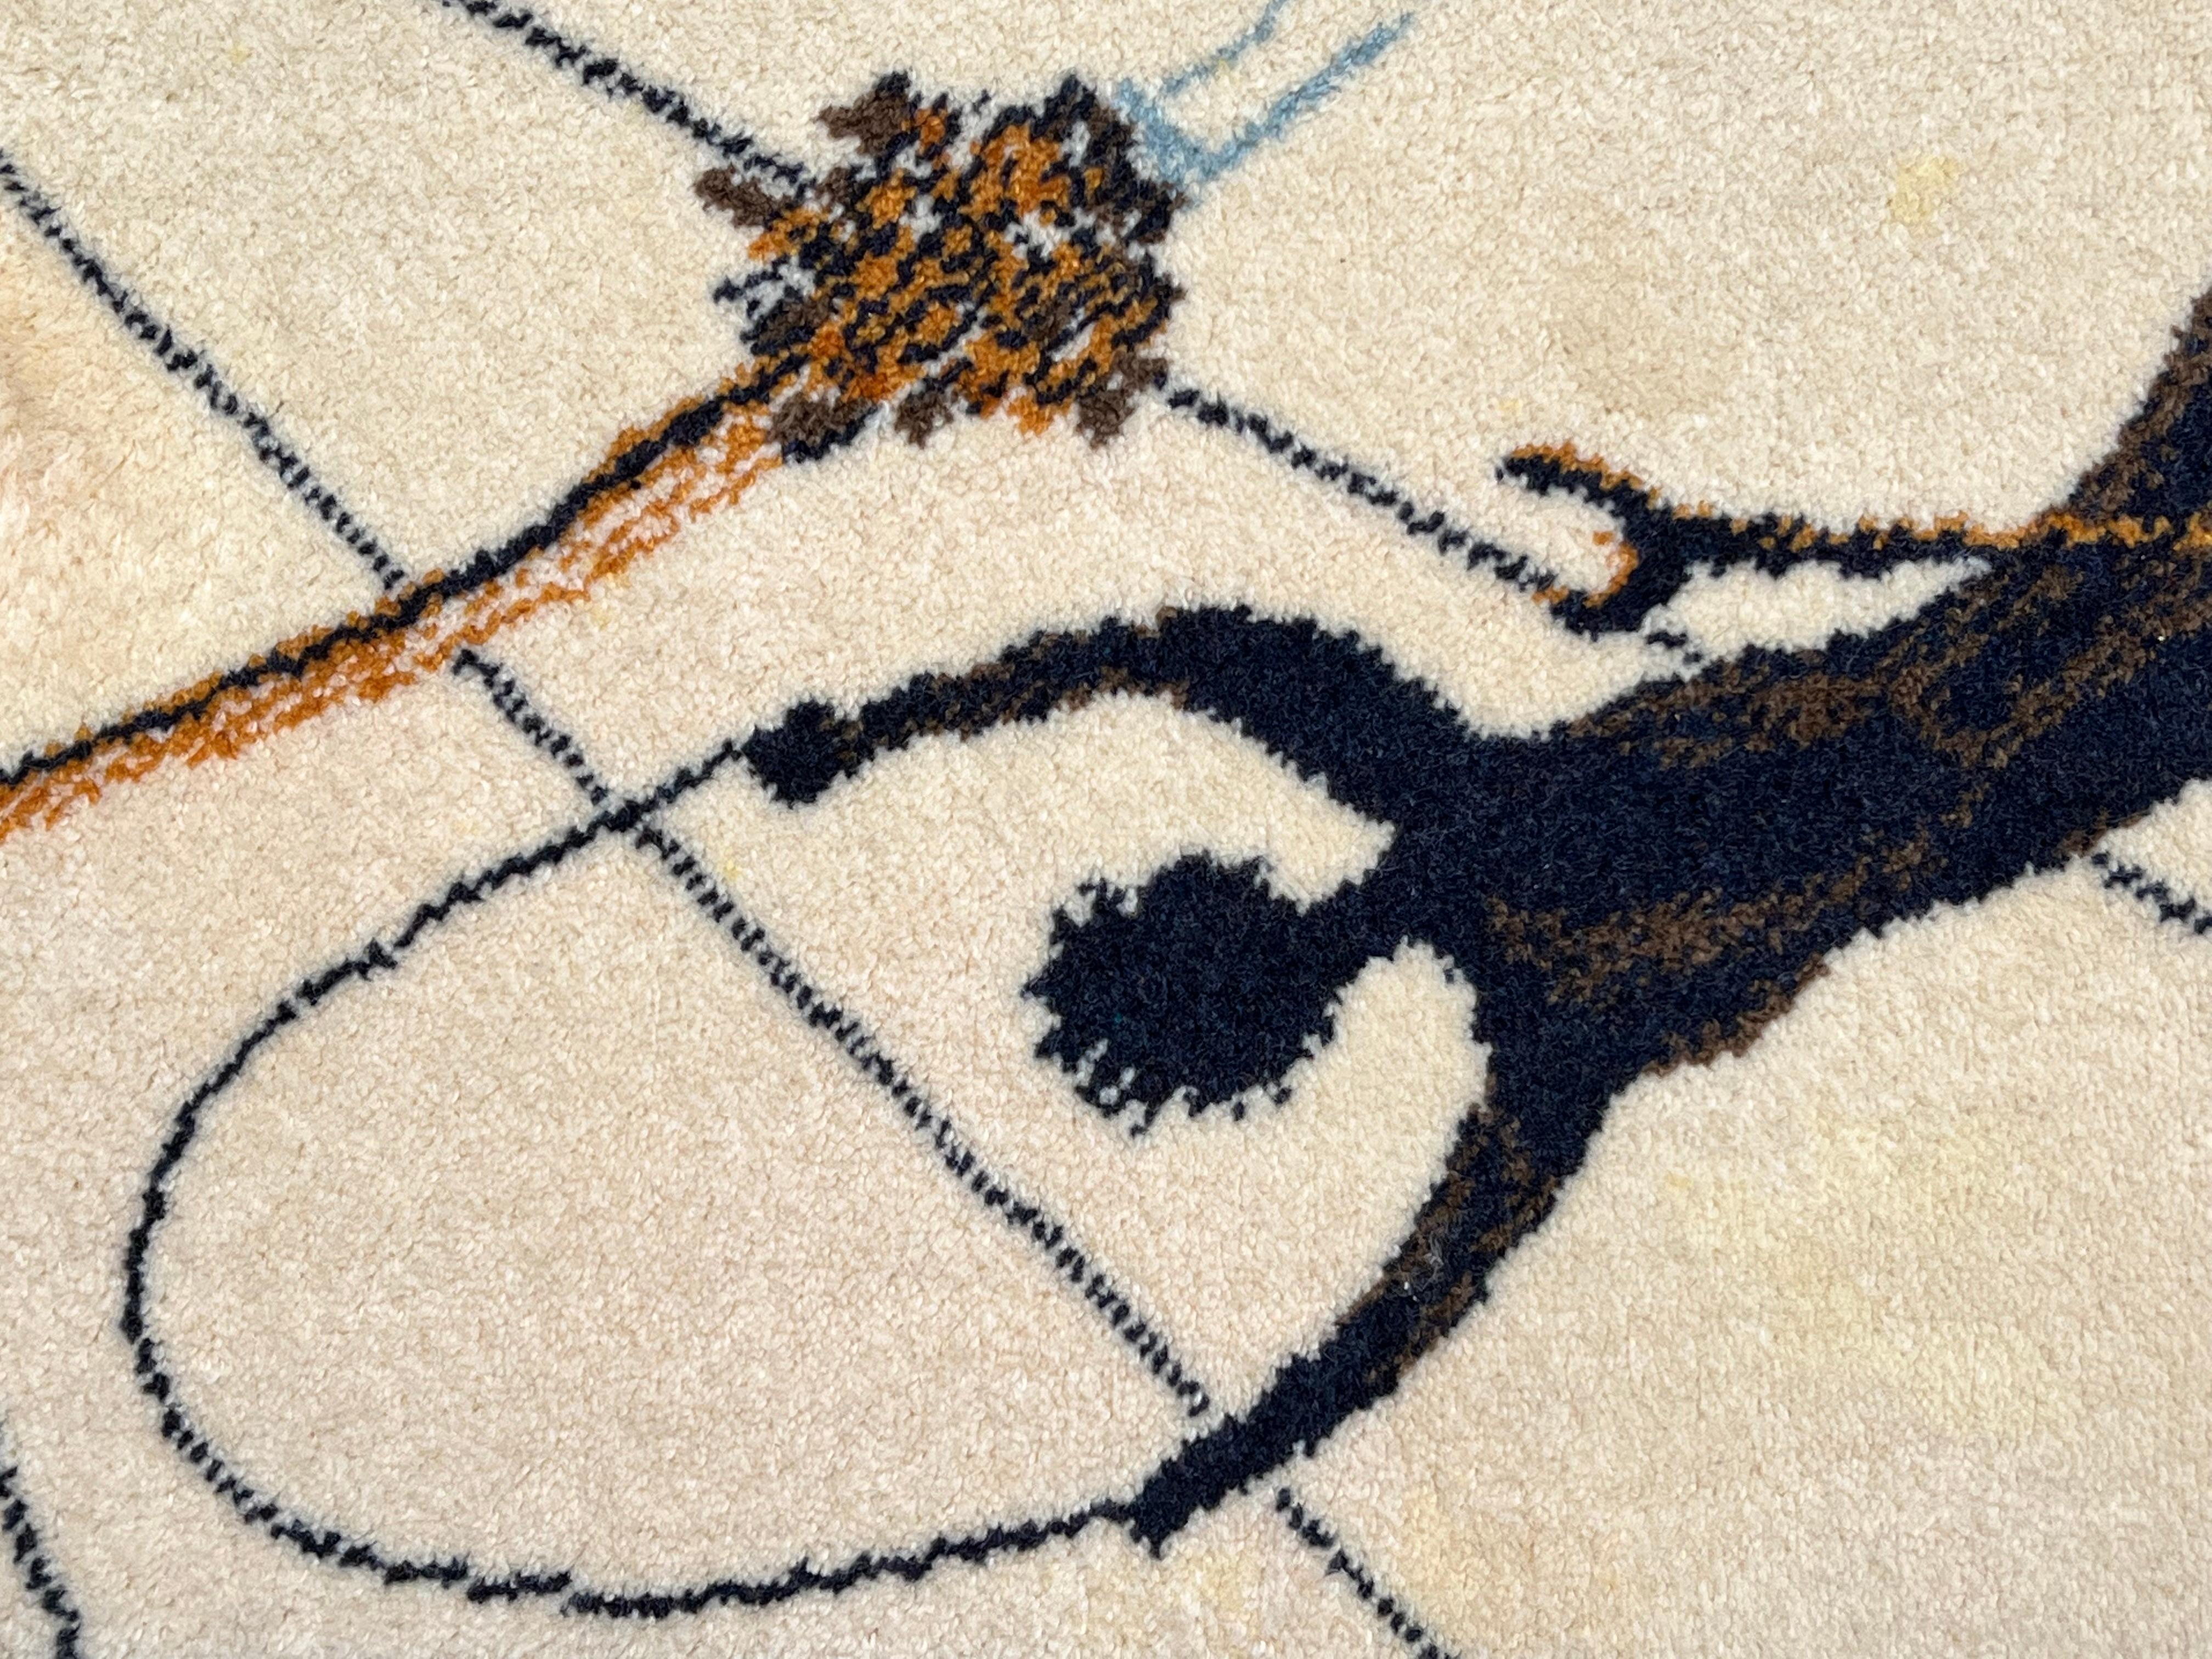 20th Century White and Blue Alice in Wonderland Salvador Dalí Rug, ca 1977 For Sale 2